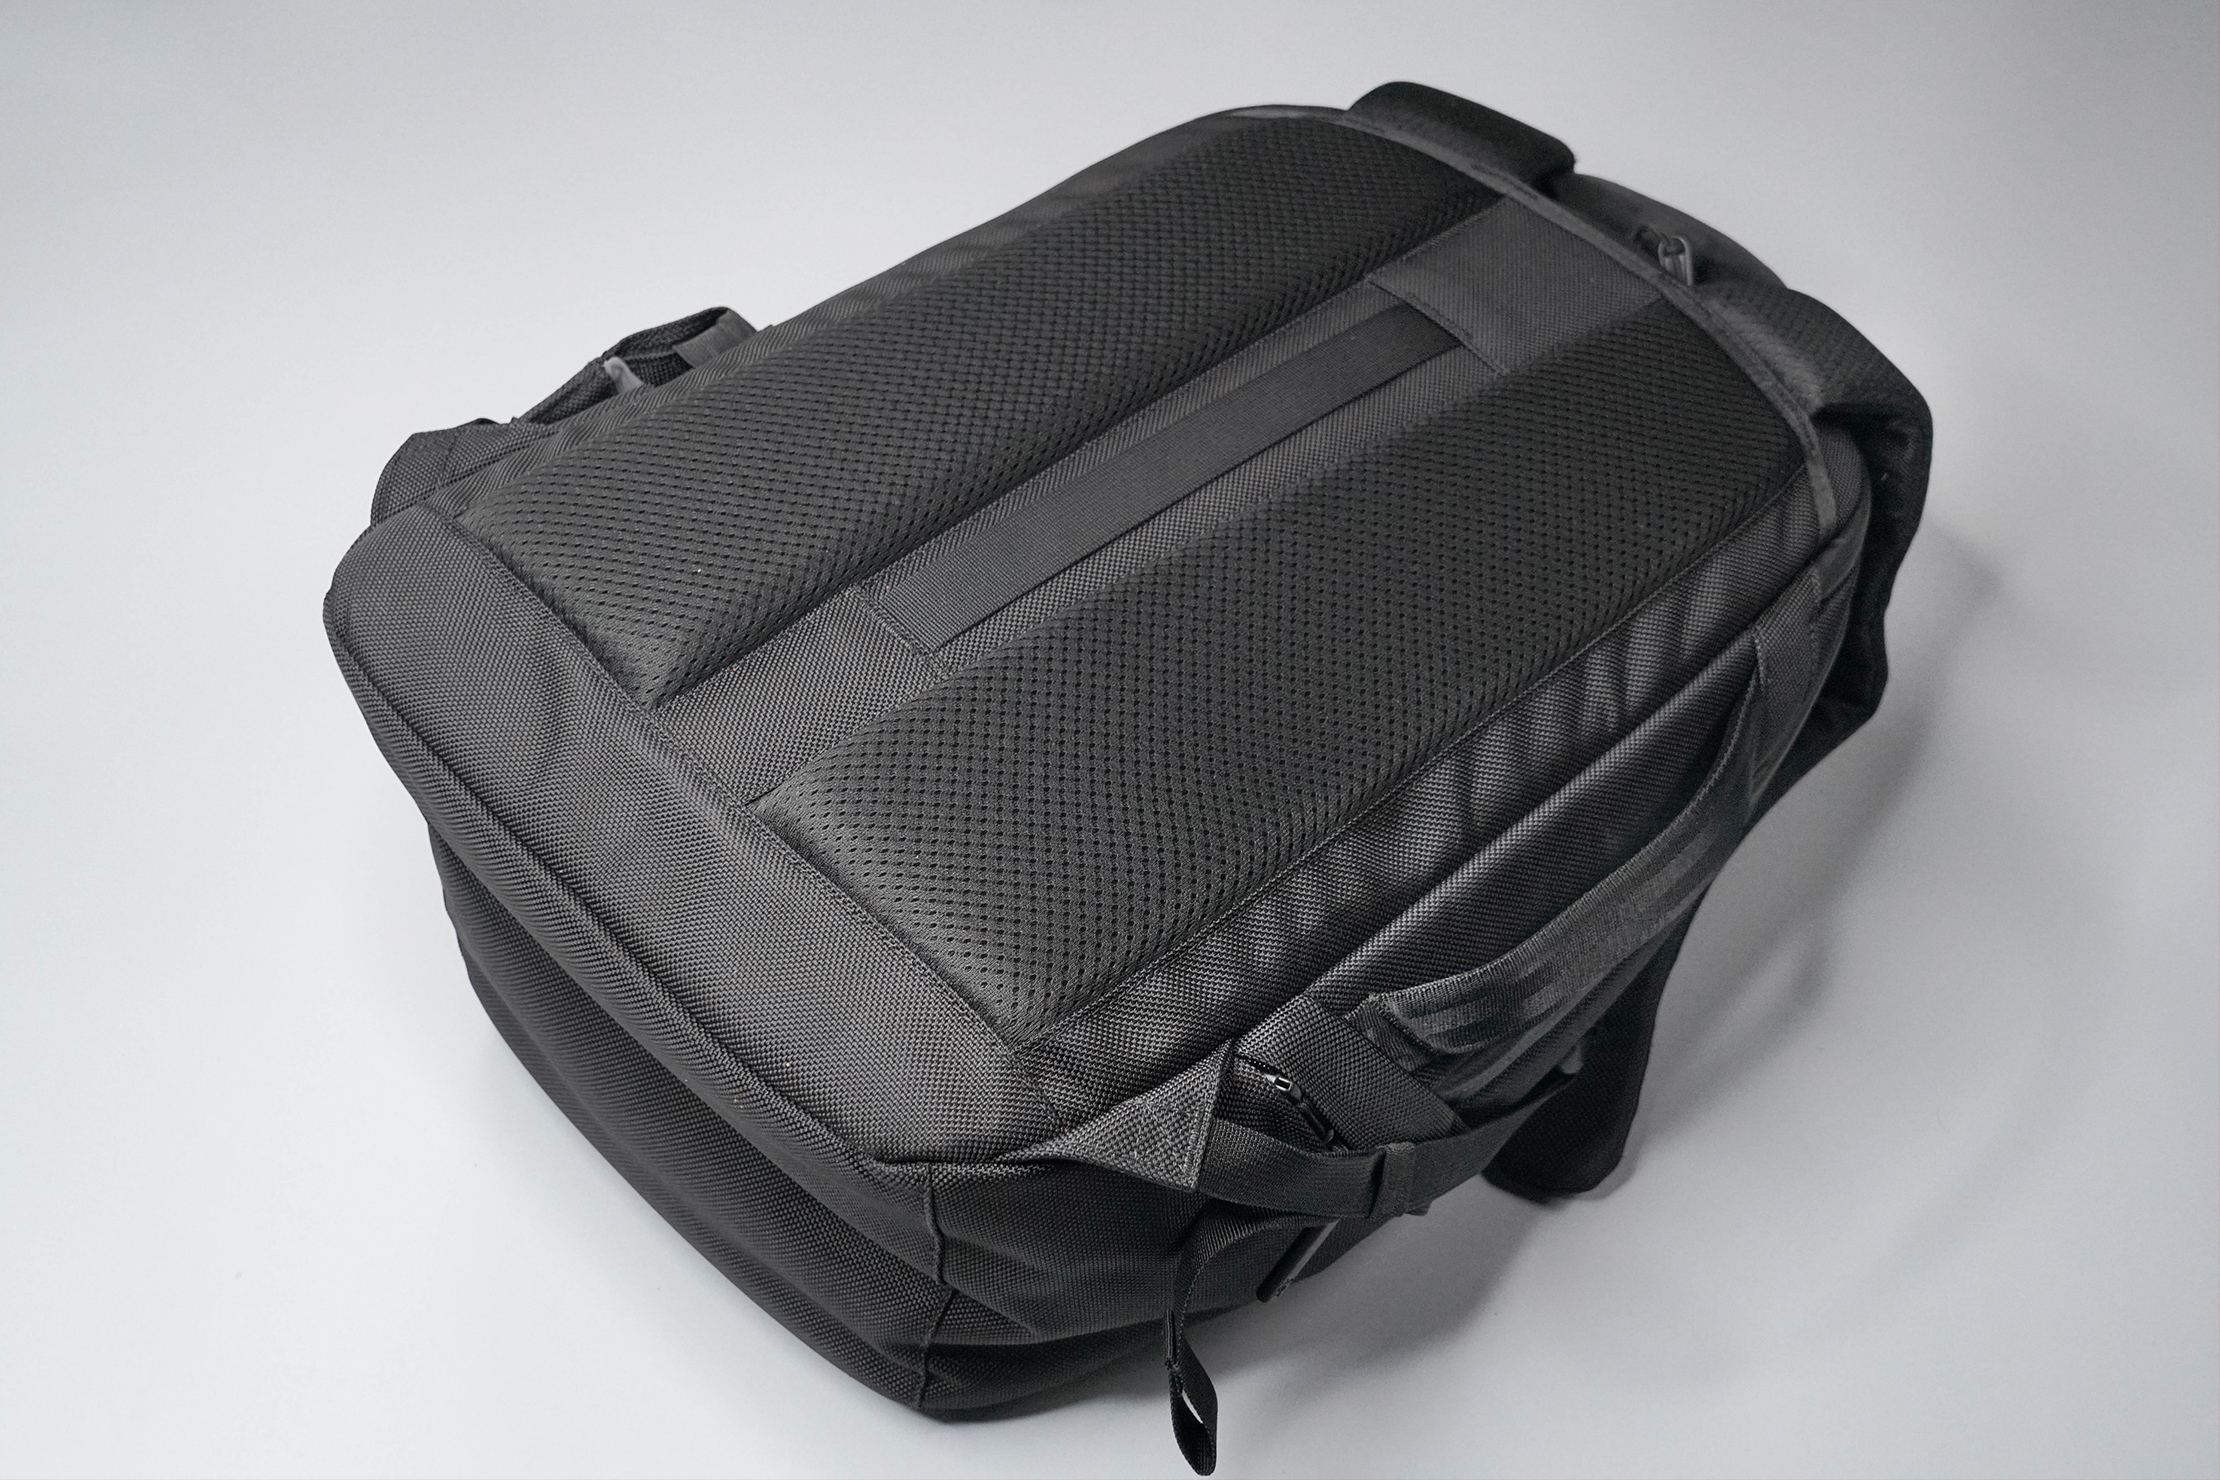 Aer Tech Pack 2 Review | Pack Hacker